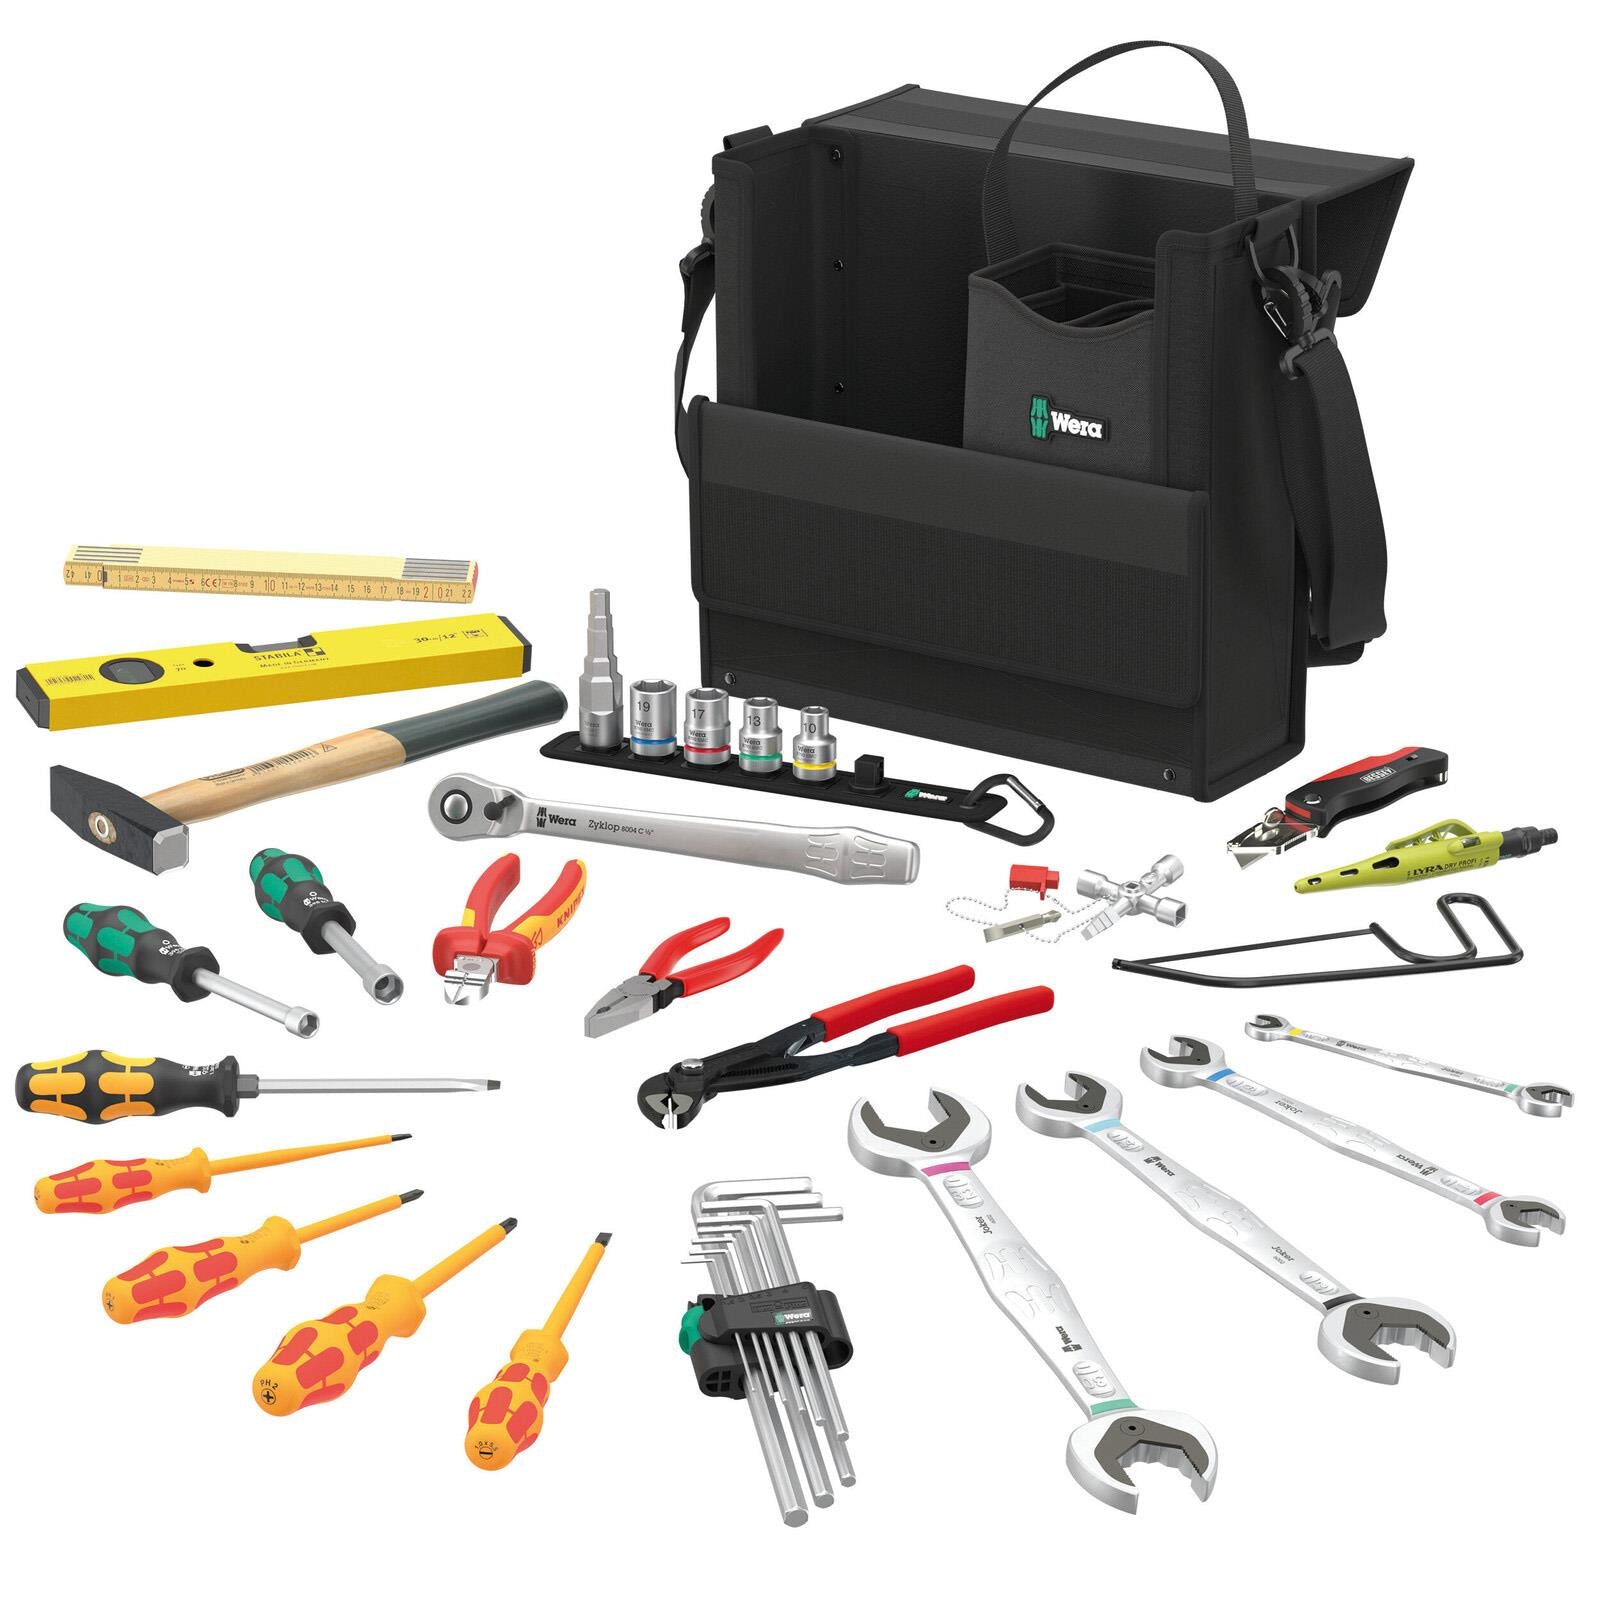 Wera Tool Kit for Plumbing Heating and Air Conditioning Wera 2go SHK 1 Tool Set 36 Pieces